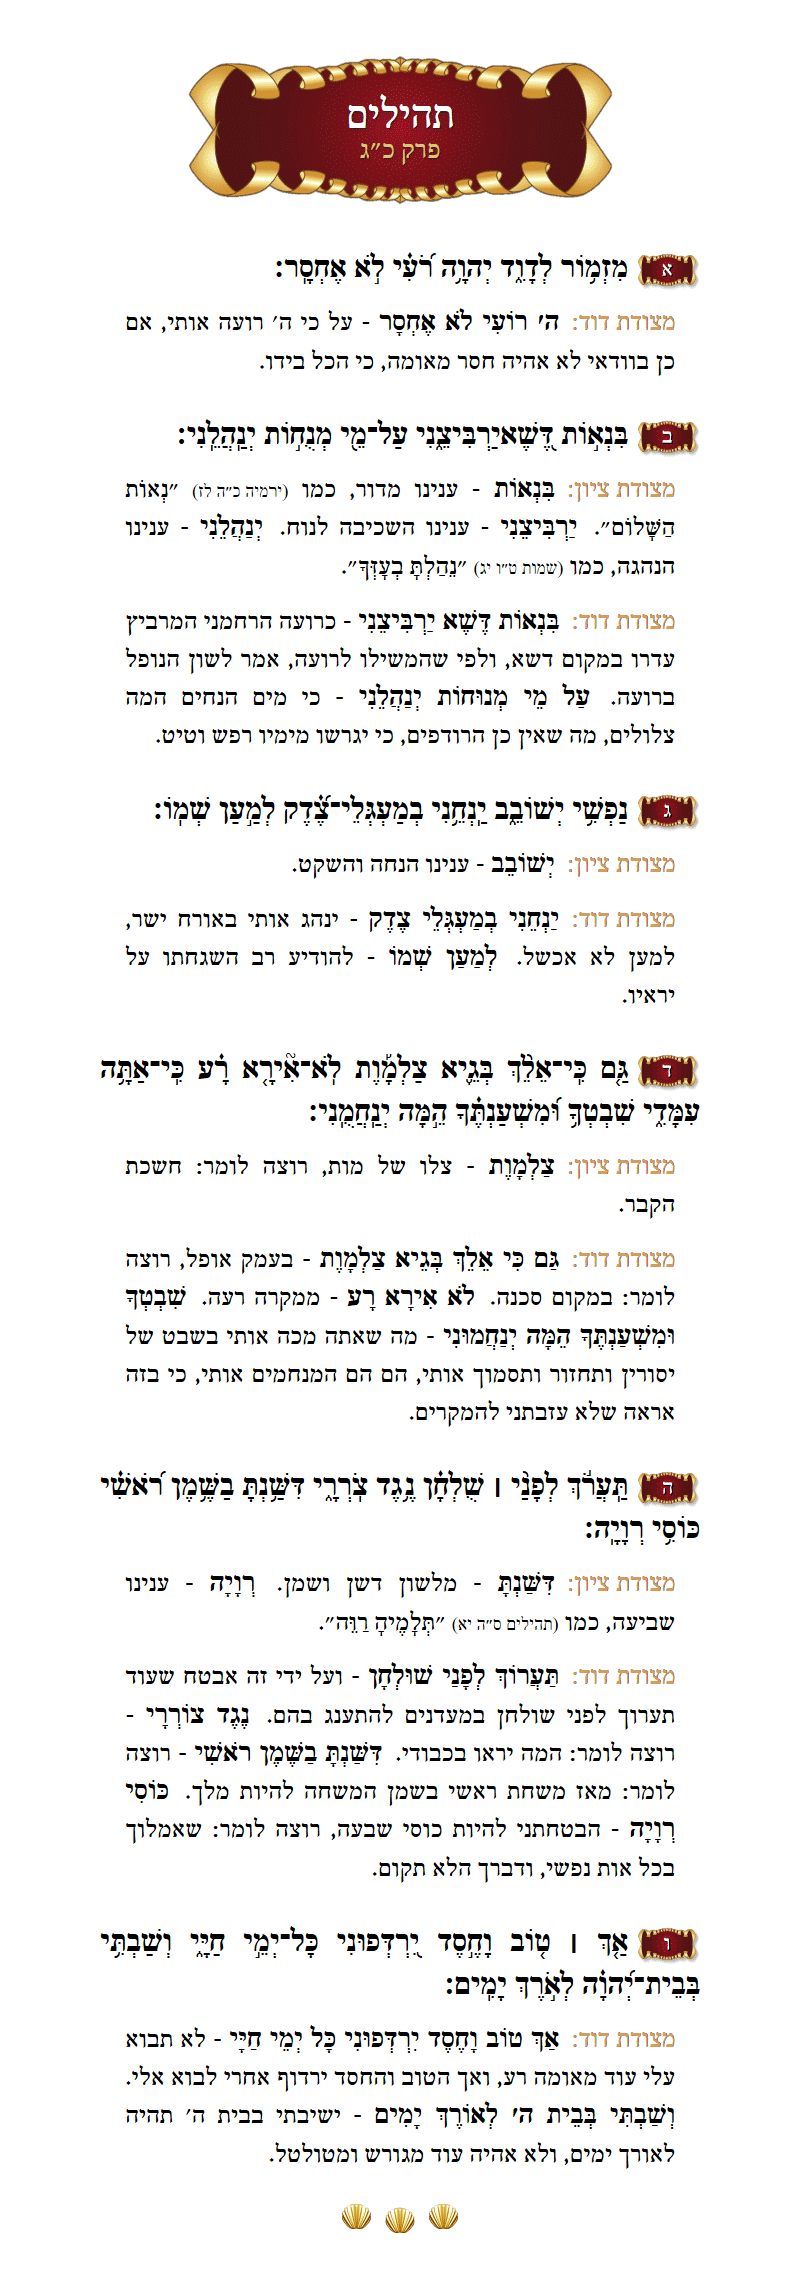 Sefer Tehillim Chapter 23 with commentary